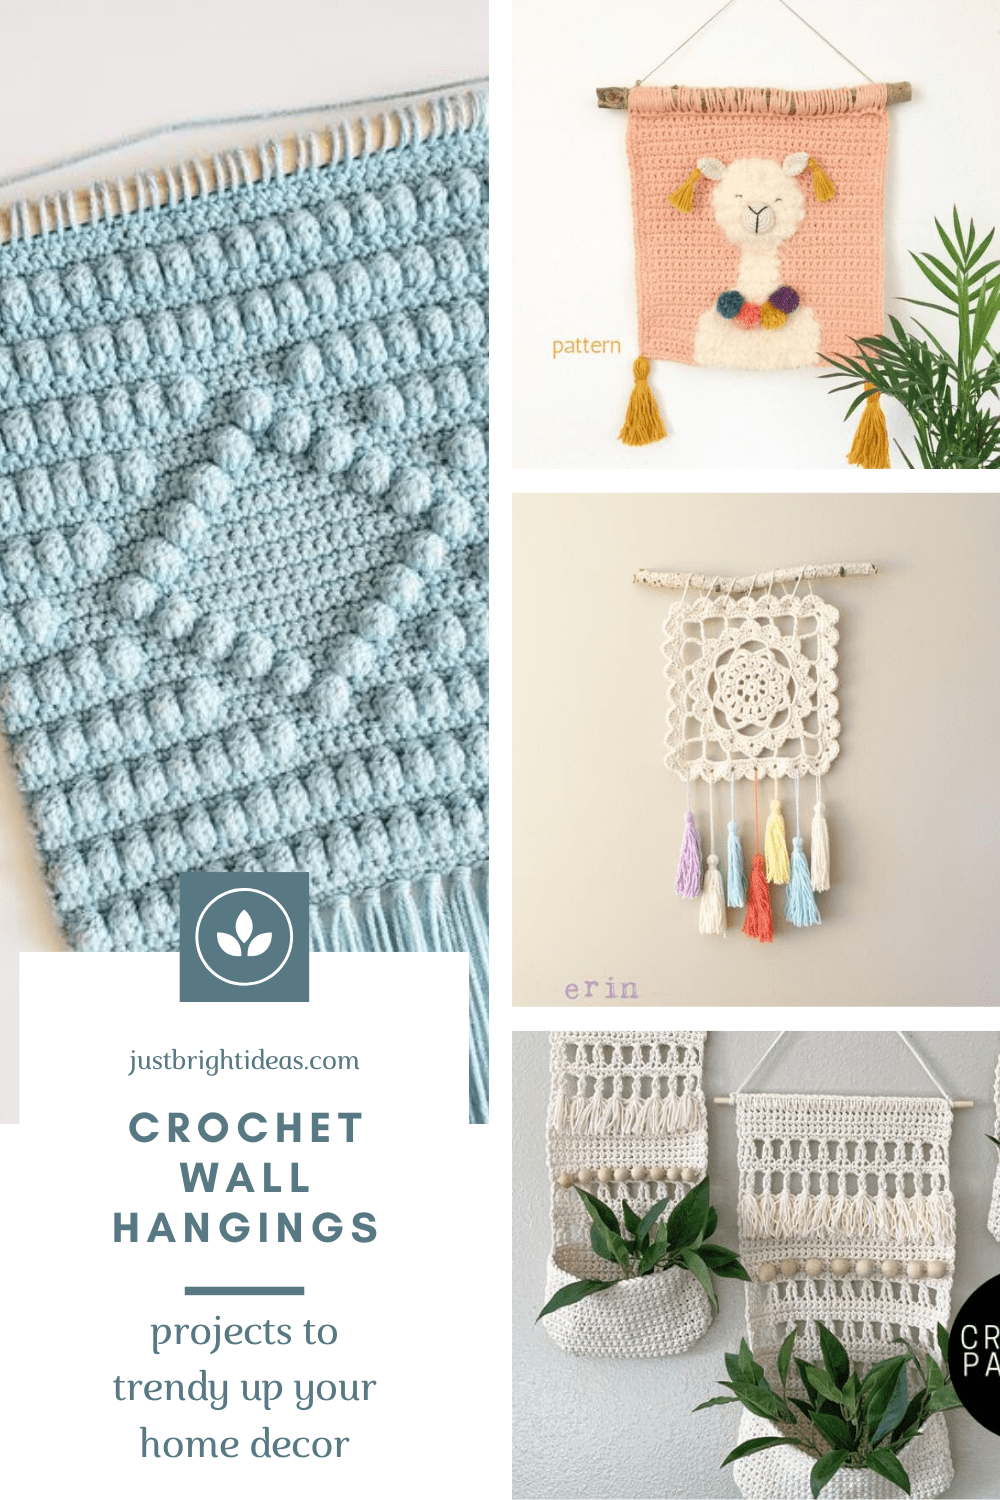 Wall hangings are so trendy right now and these crochet patterns are relaxing to make and perfect for bringing a pop of color of boho vibe to your blank walls